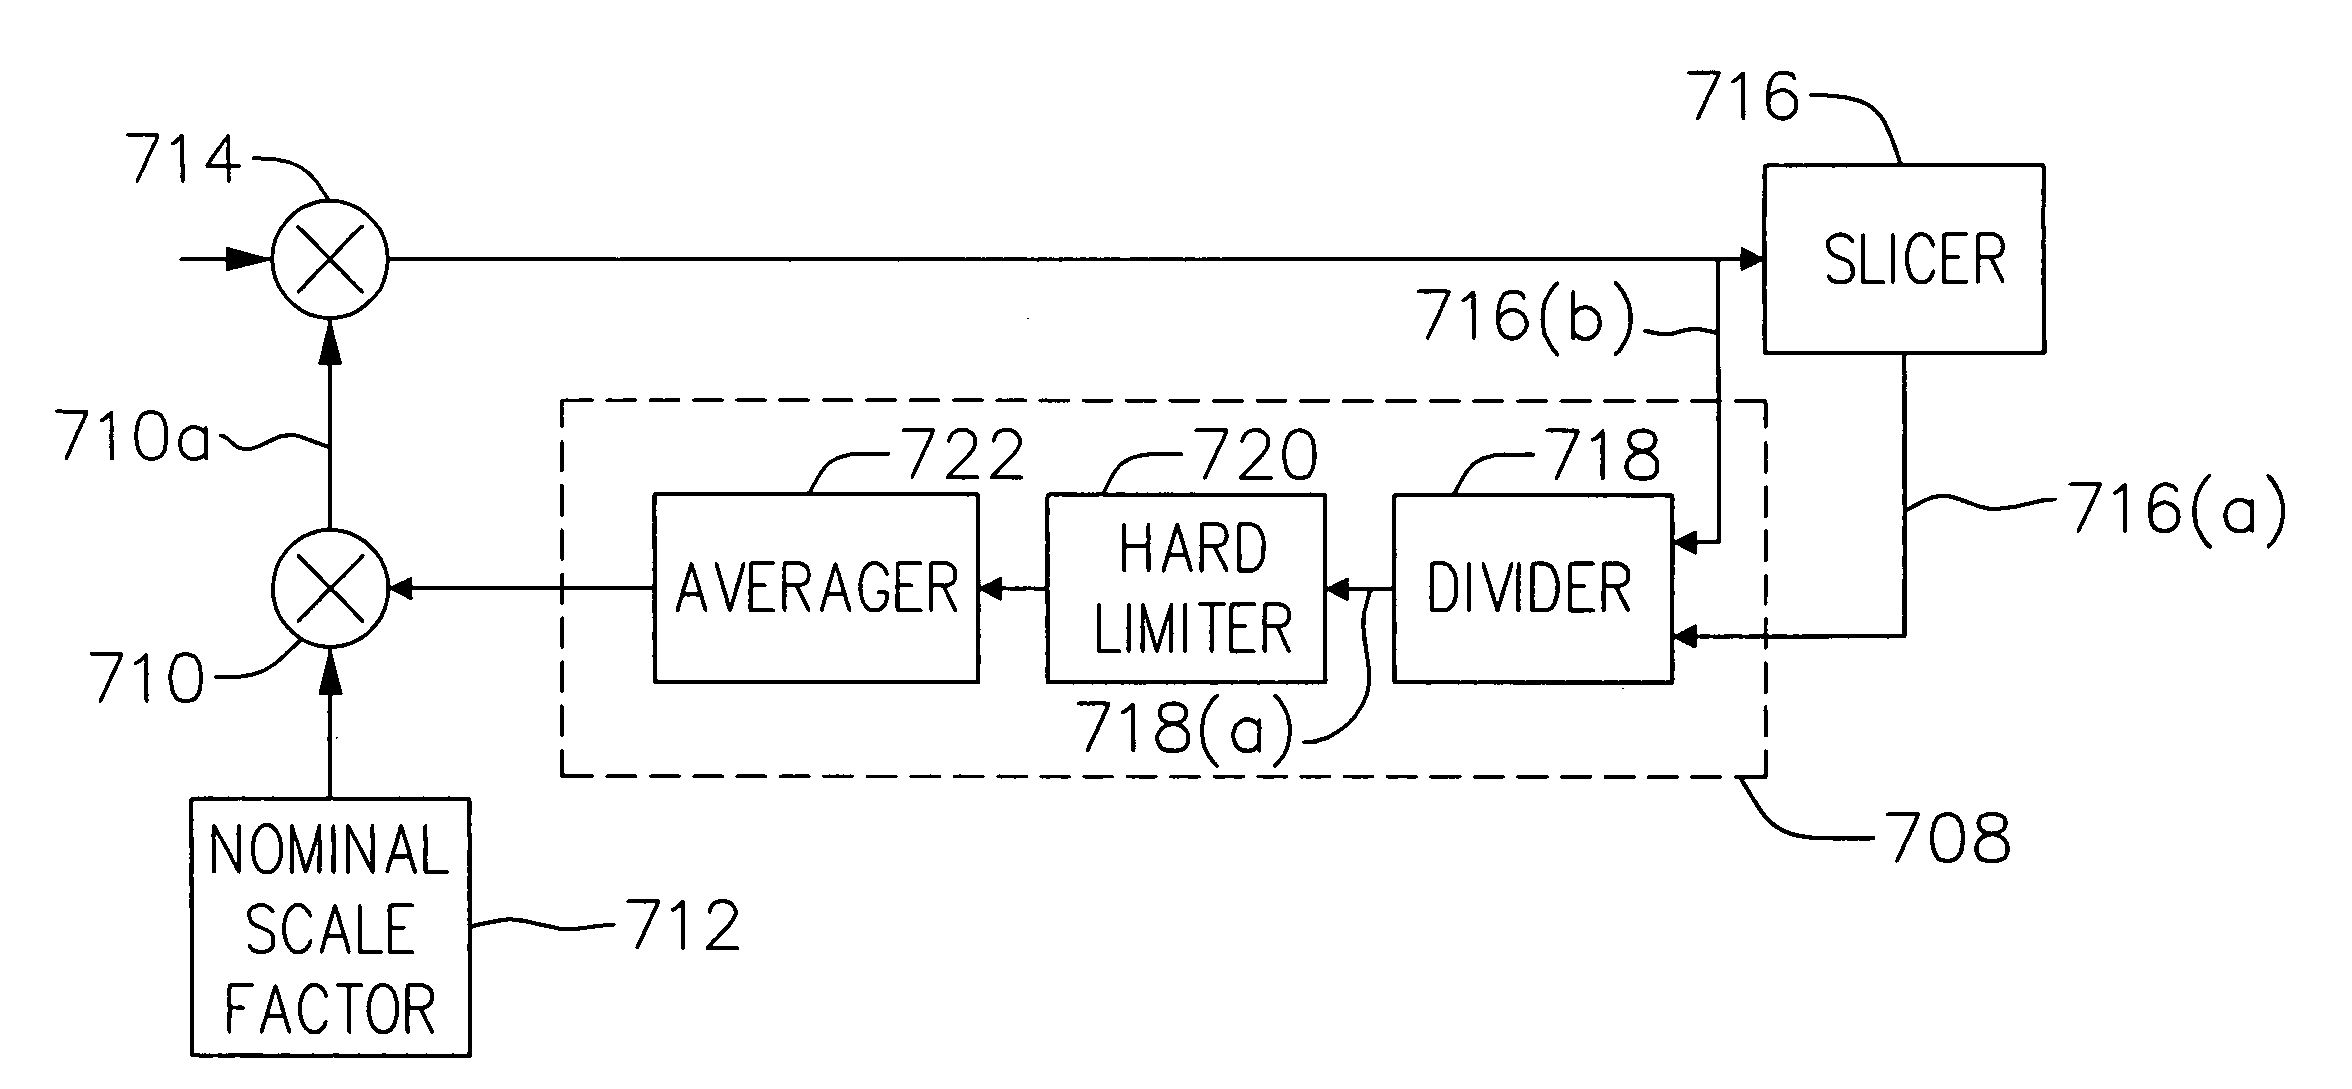 Voice and data exchange over a packet based network with scaling error compensation